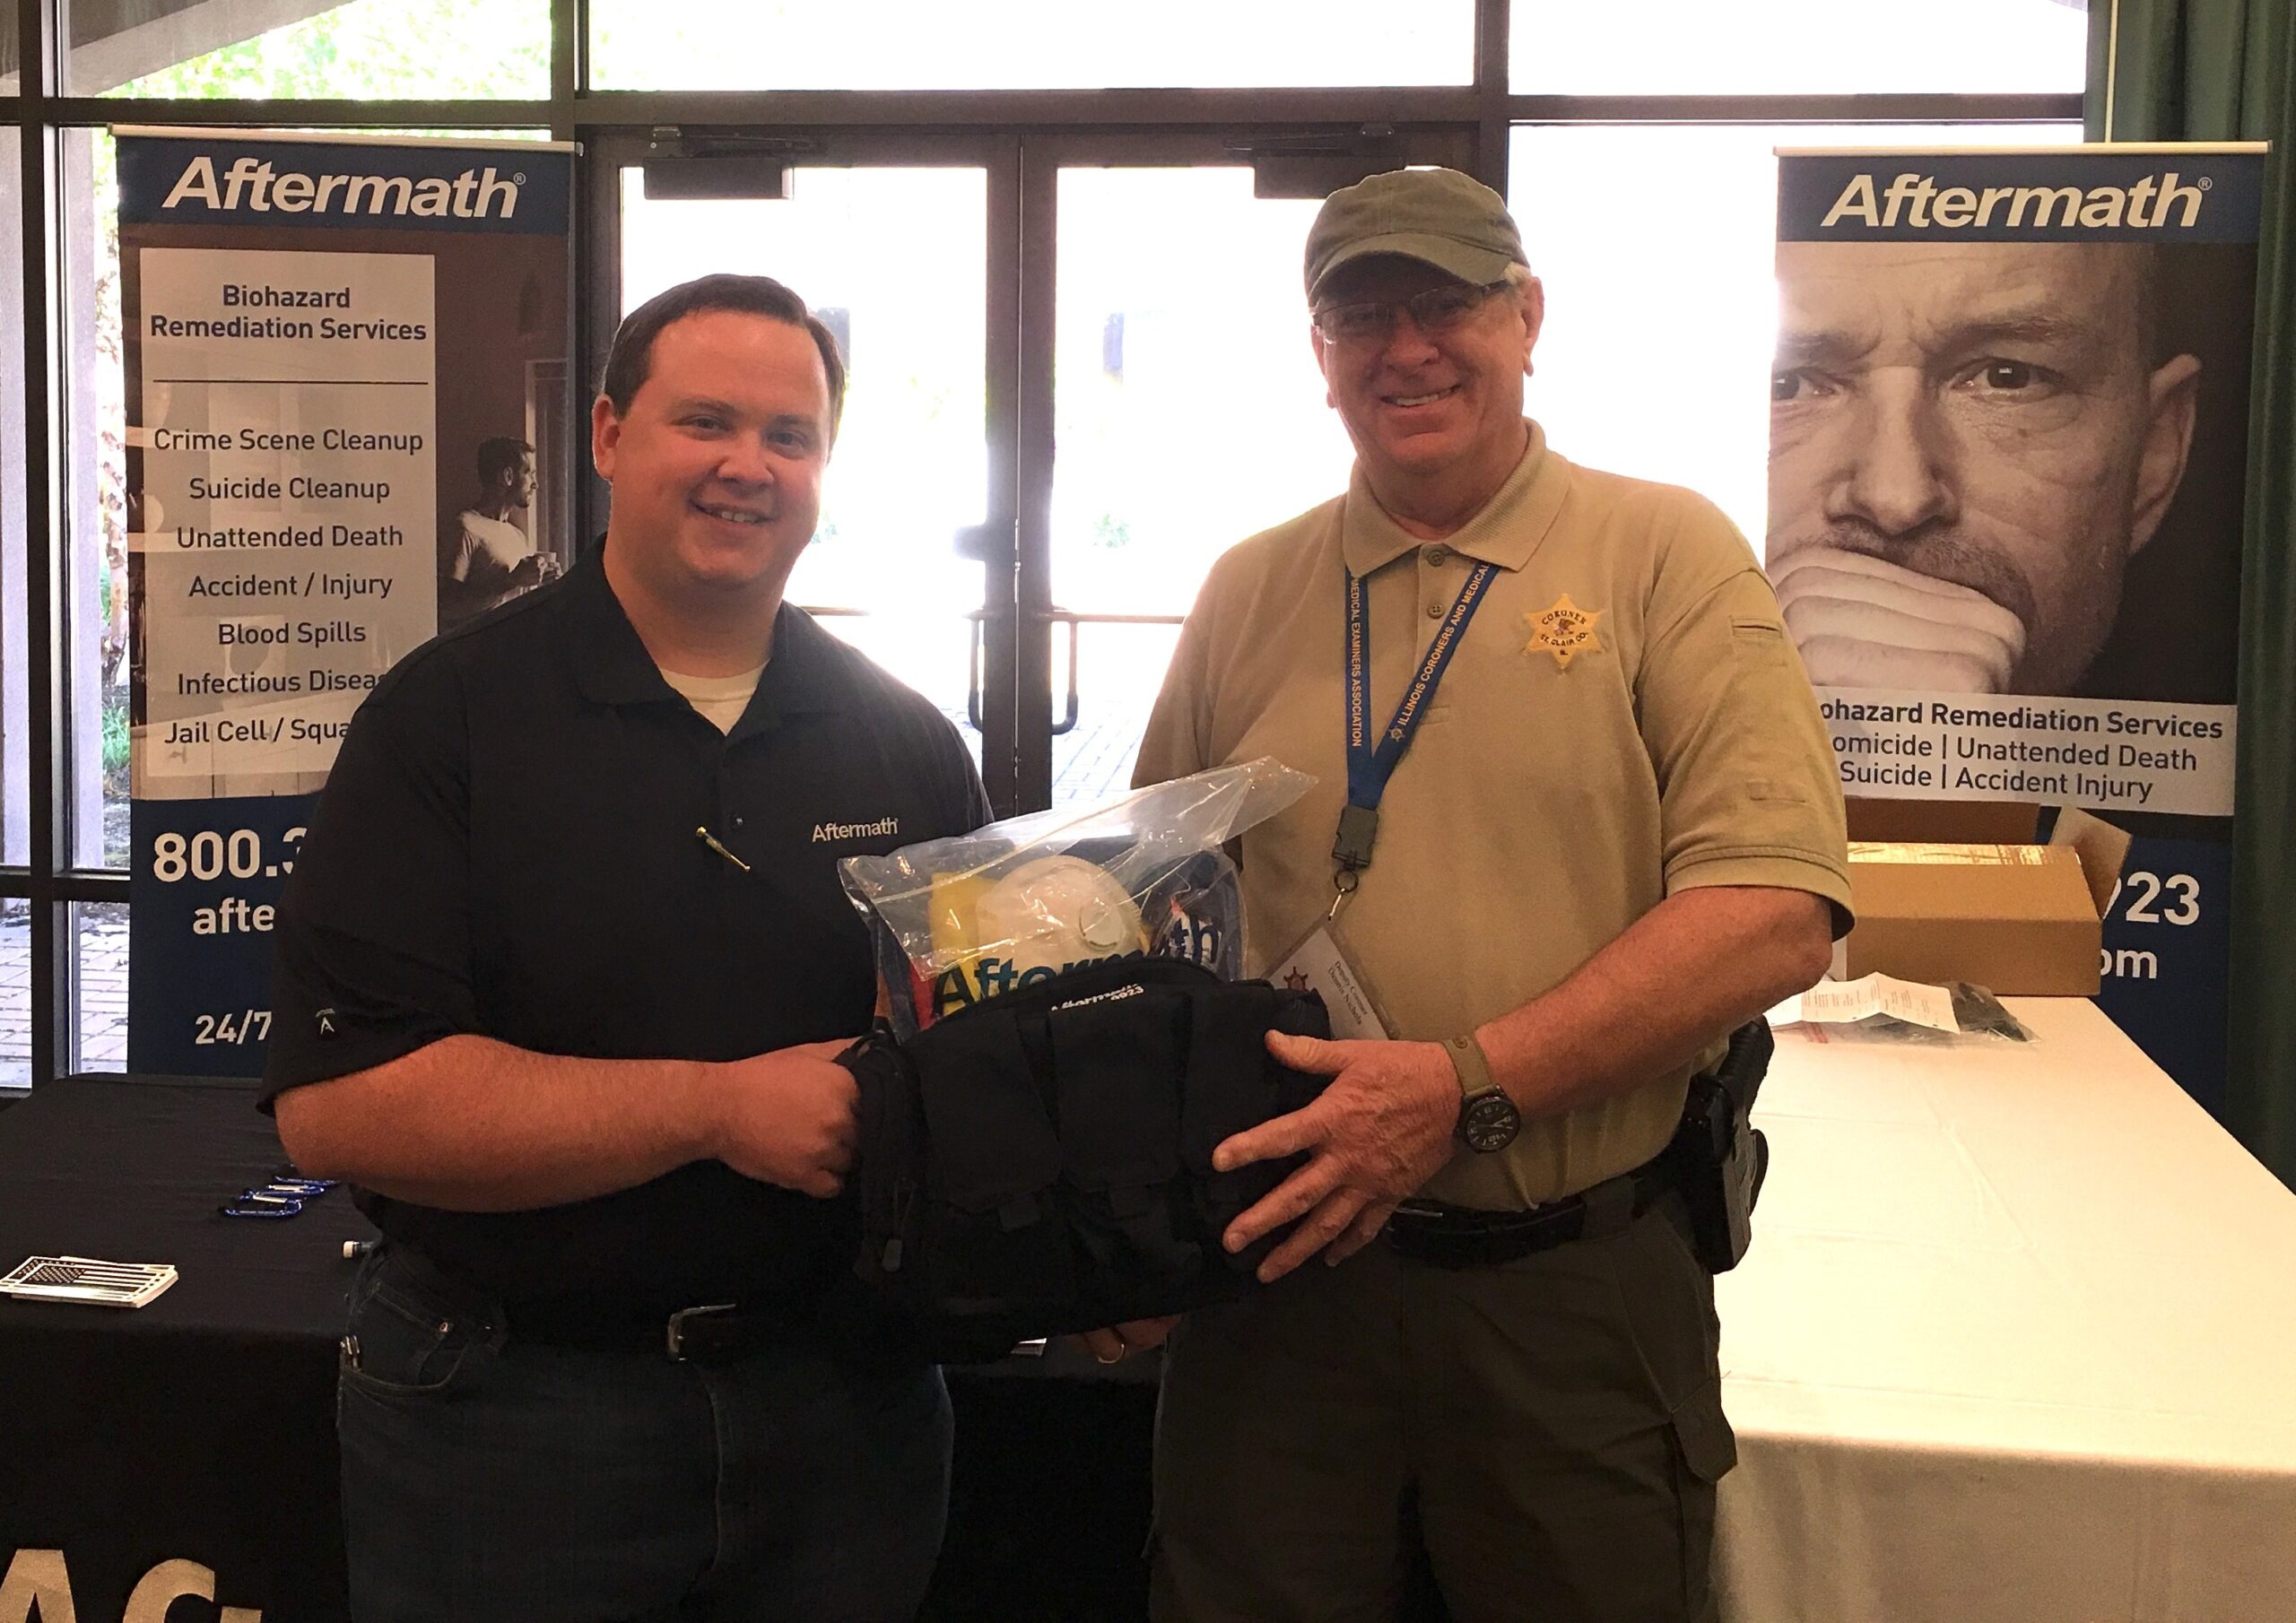 Aftermath awards Dennis Nichols a PPE kit and Tactical Bag at the 2018 ICMEA Conference